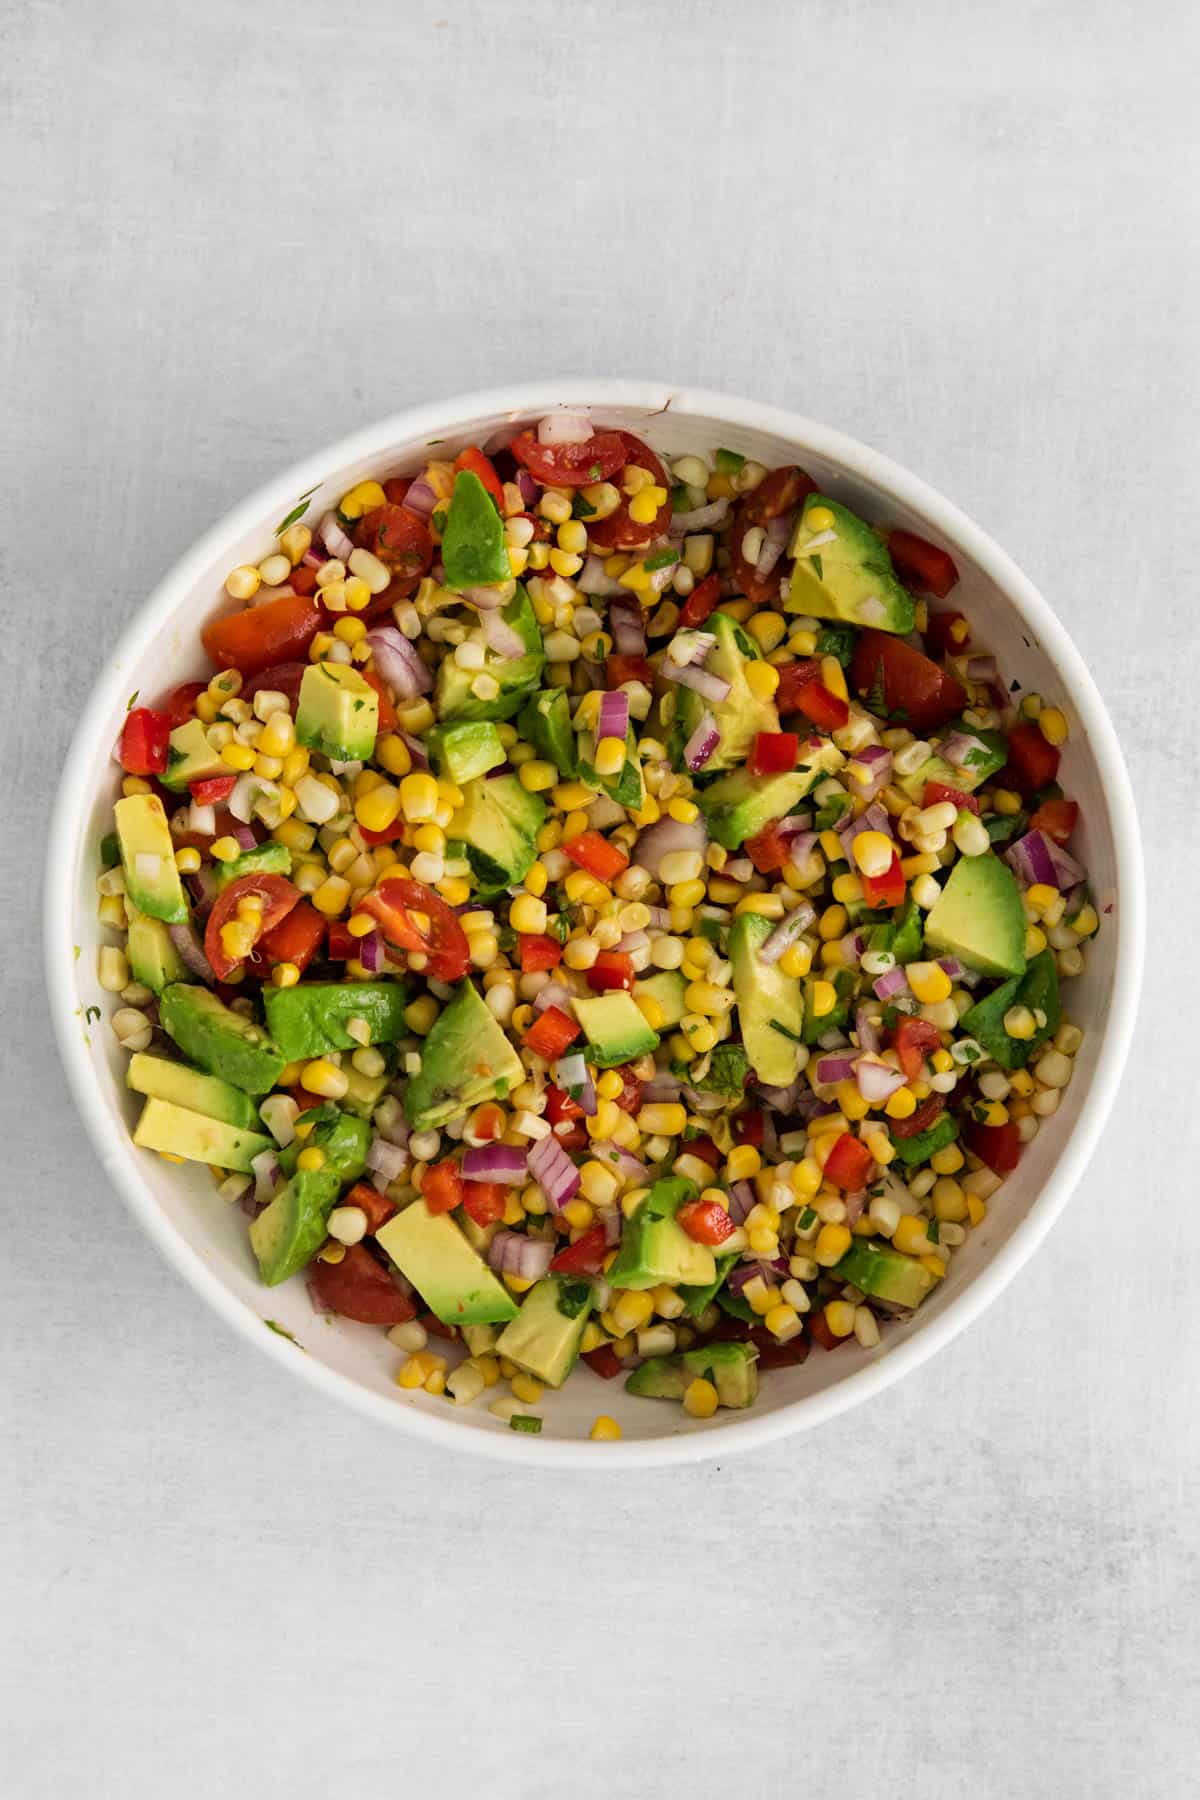 A large serving bowl of corn and avocado salad.